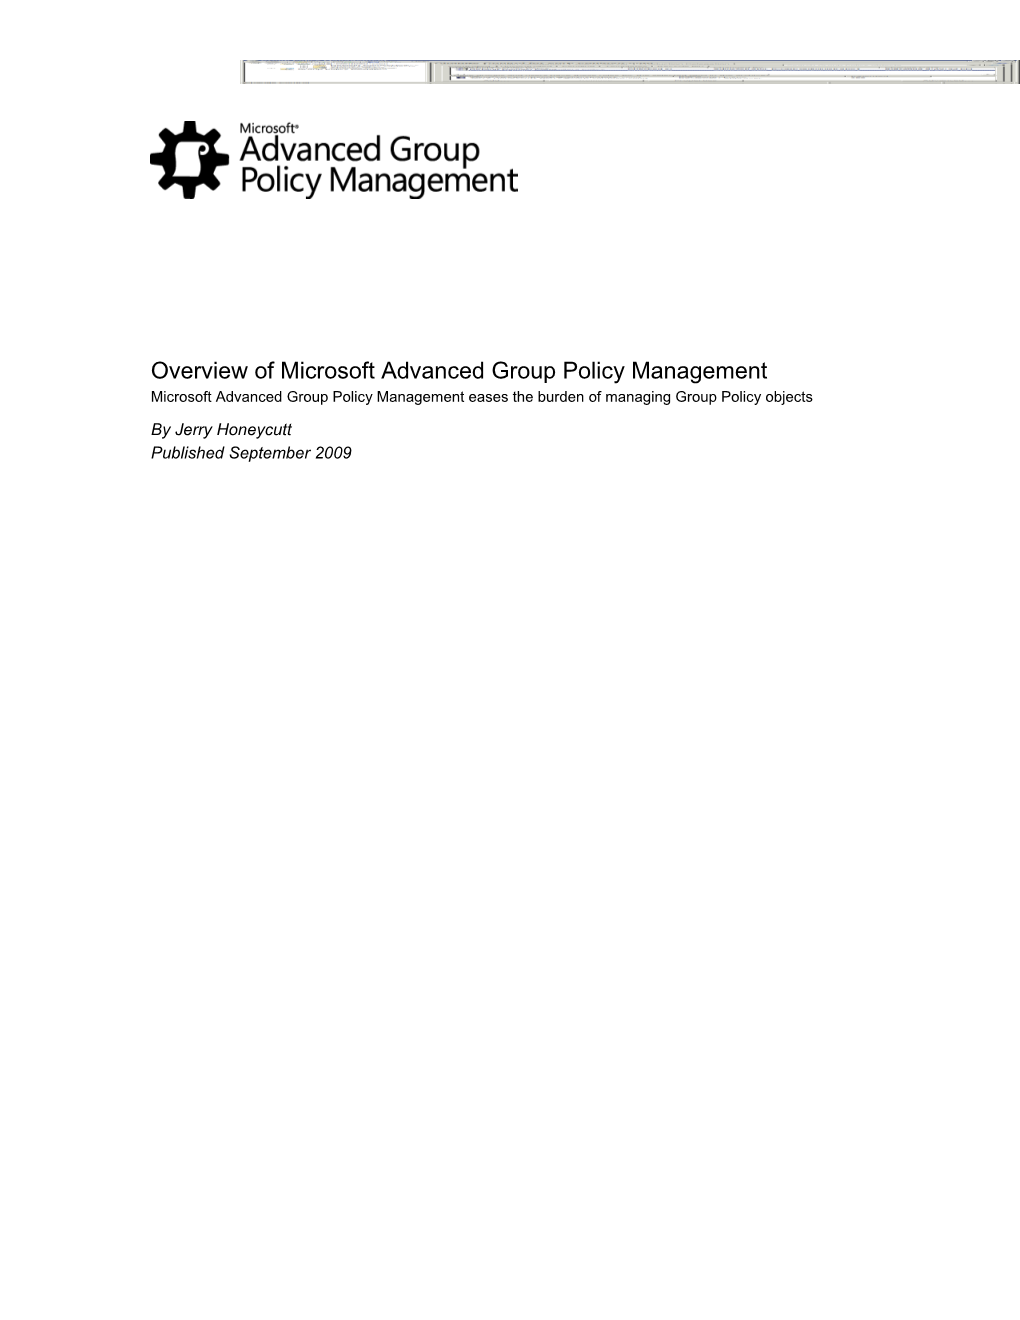 Overview of Advanced Group Policy Management